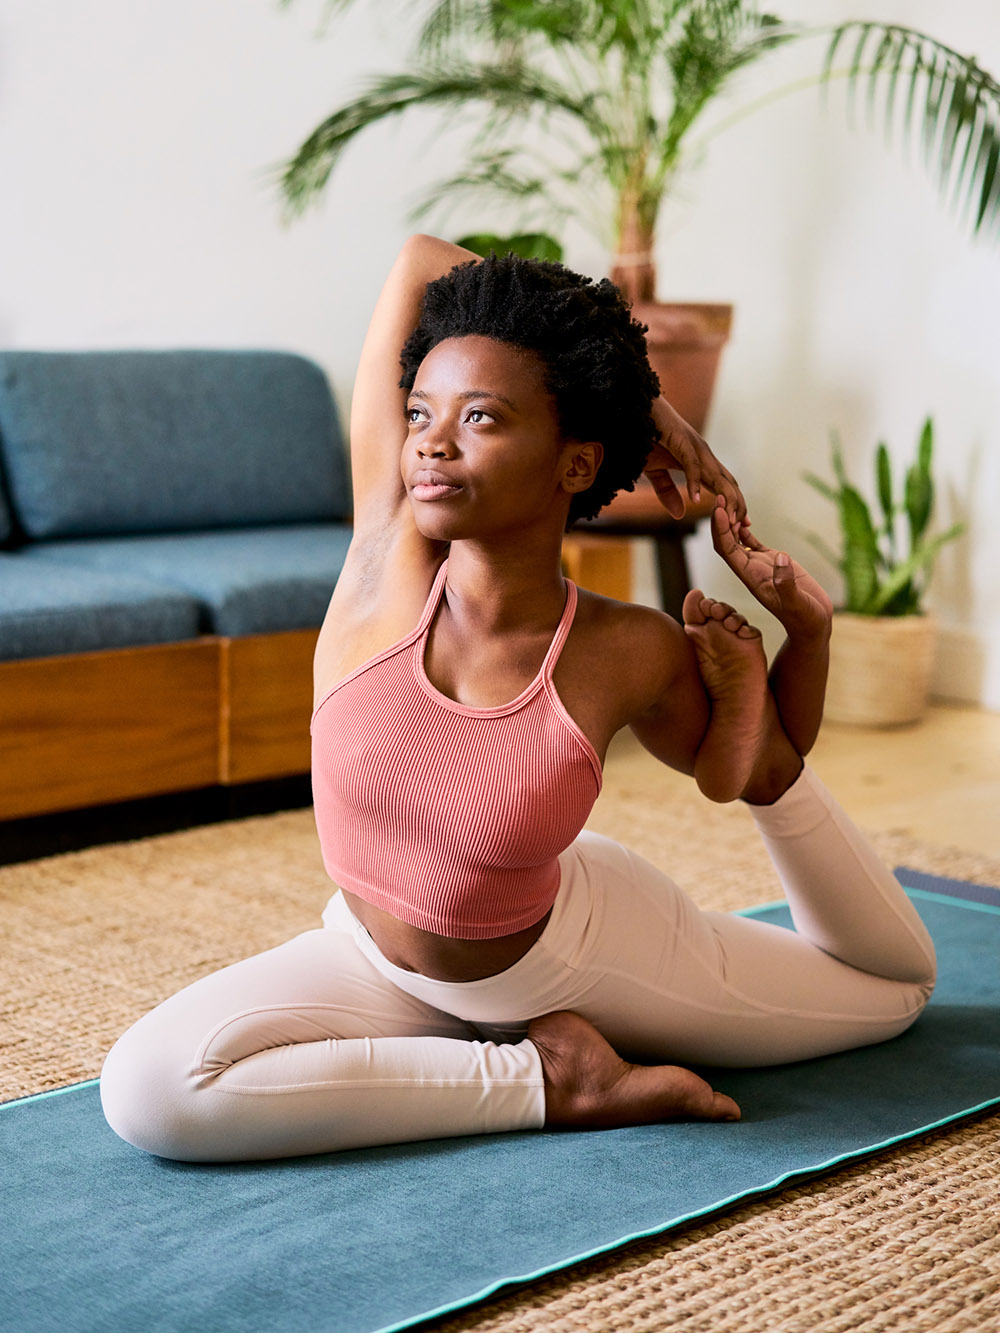 Yoga vs. Pilates: Here Are Their Differences and Benefits